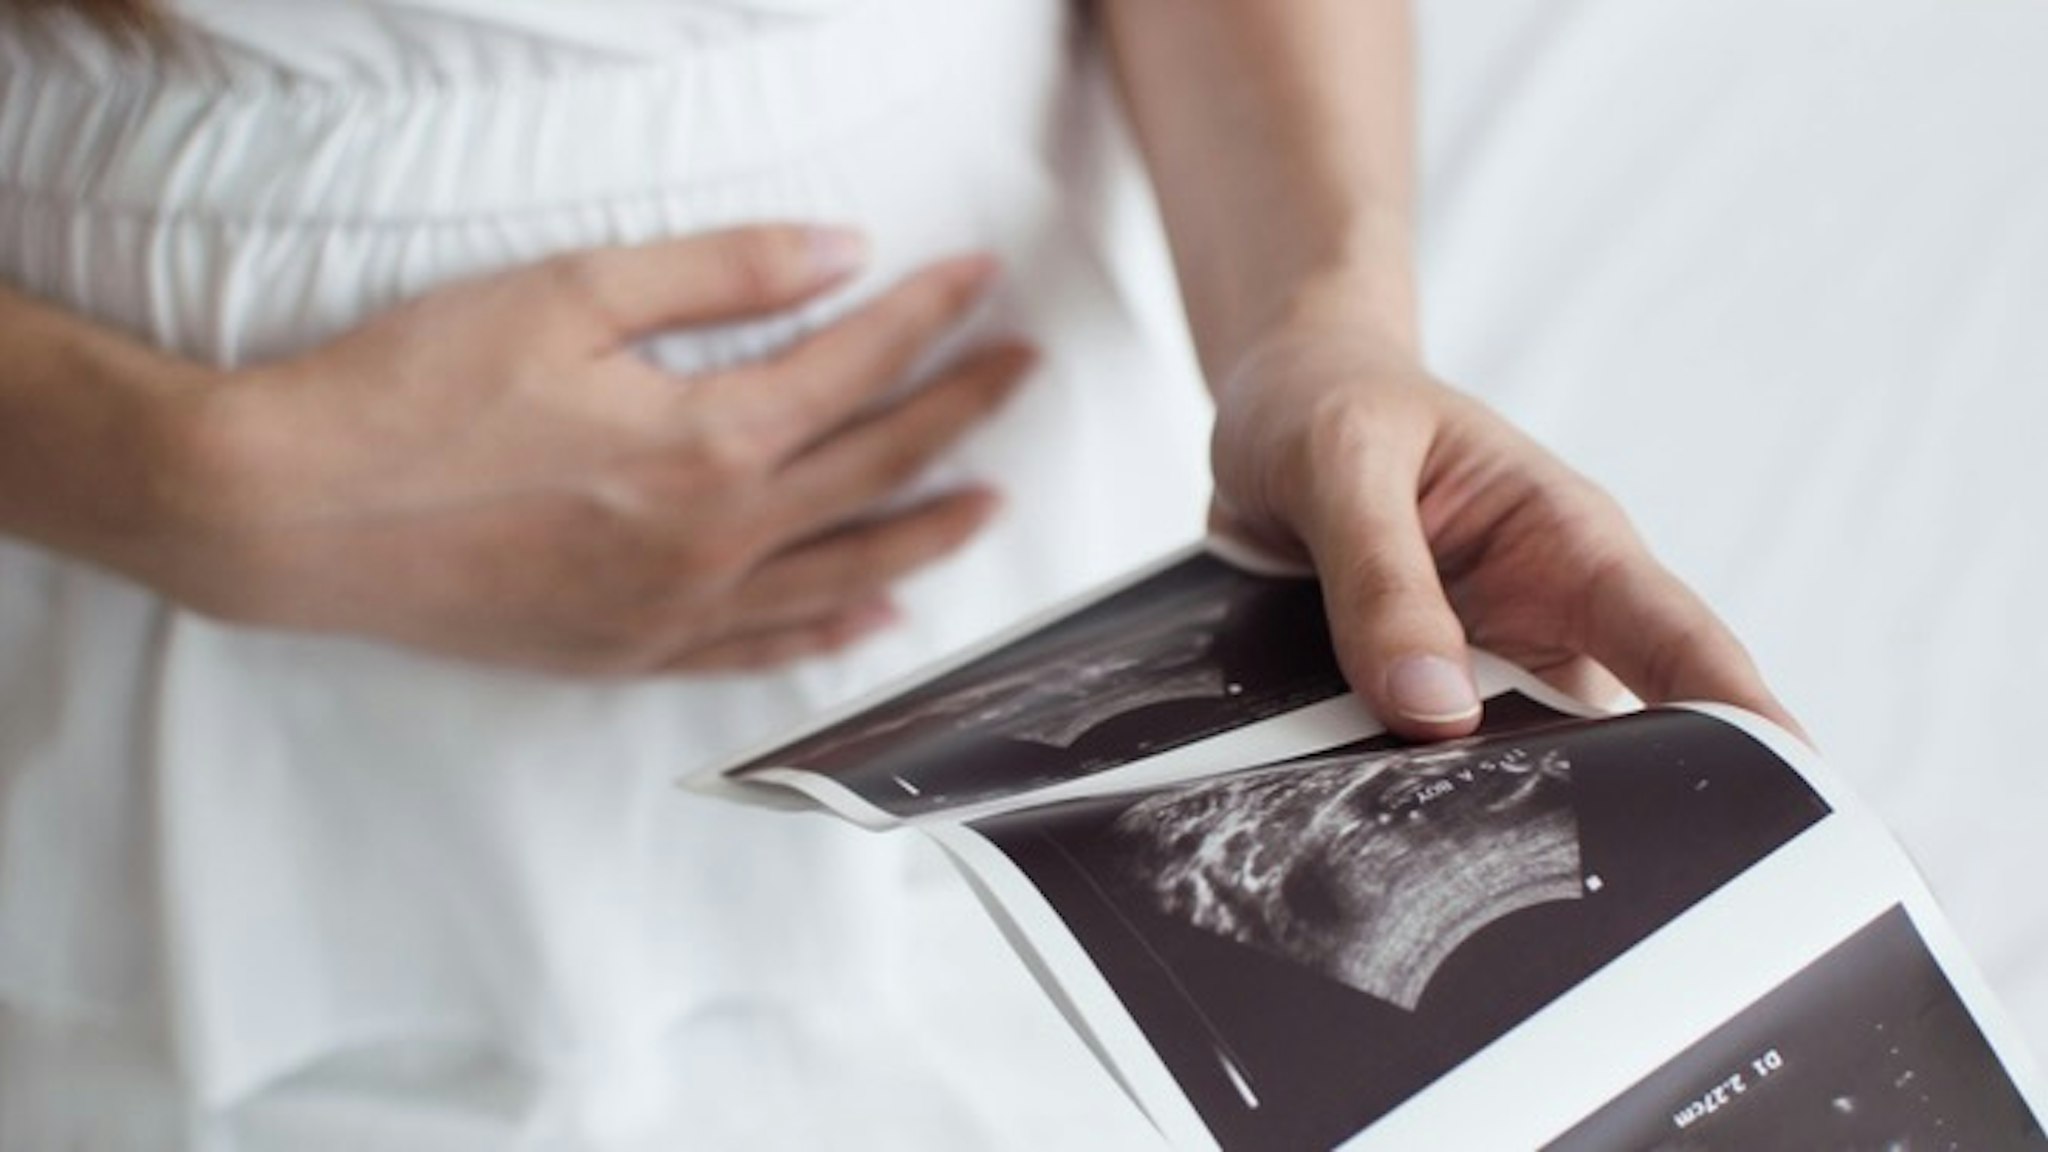 A pregnant woman is holding an ultrasound scan result - stock photo A midsection of a pregnant Southeast Asian woman holding an ultrasound scan result on the bed